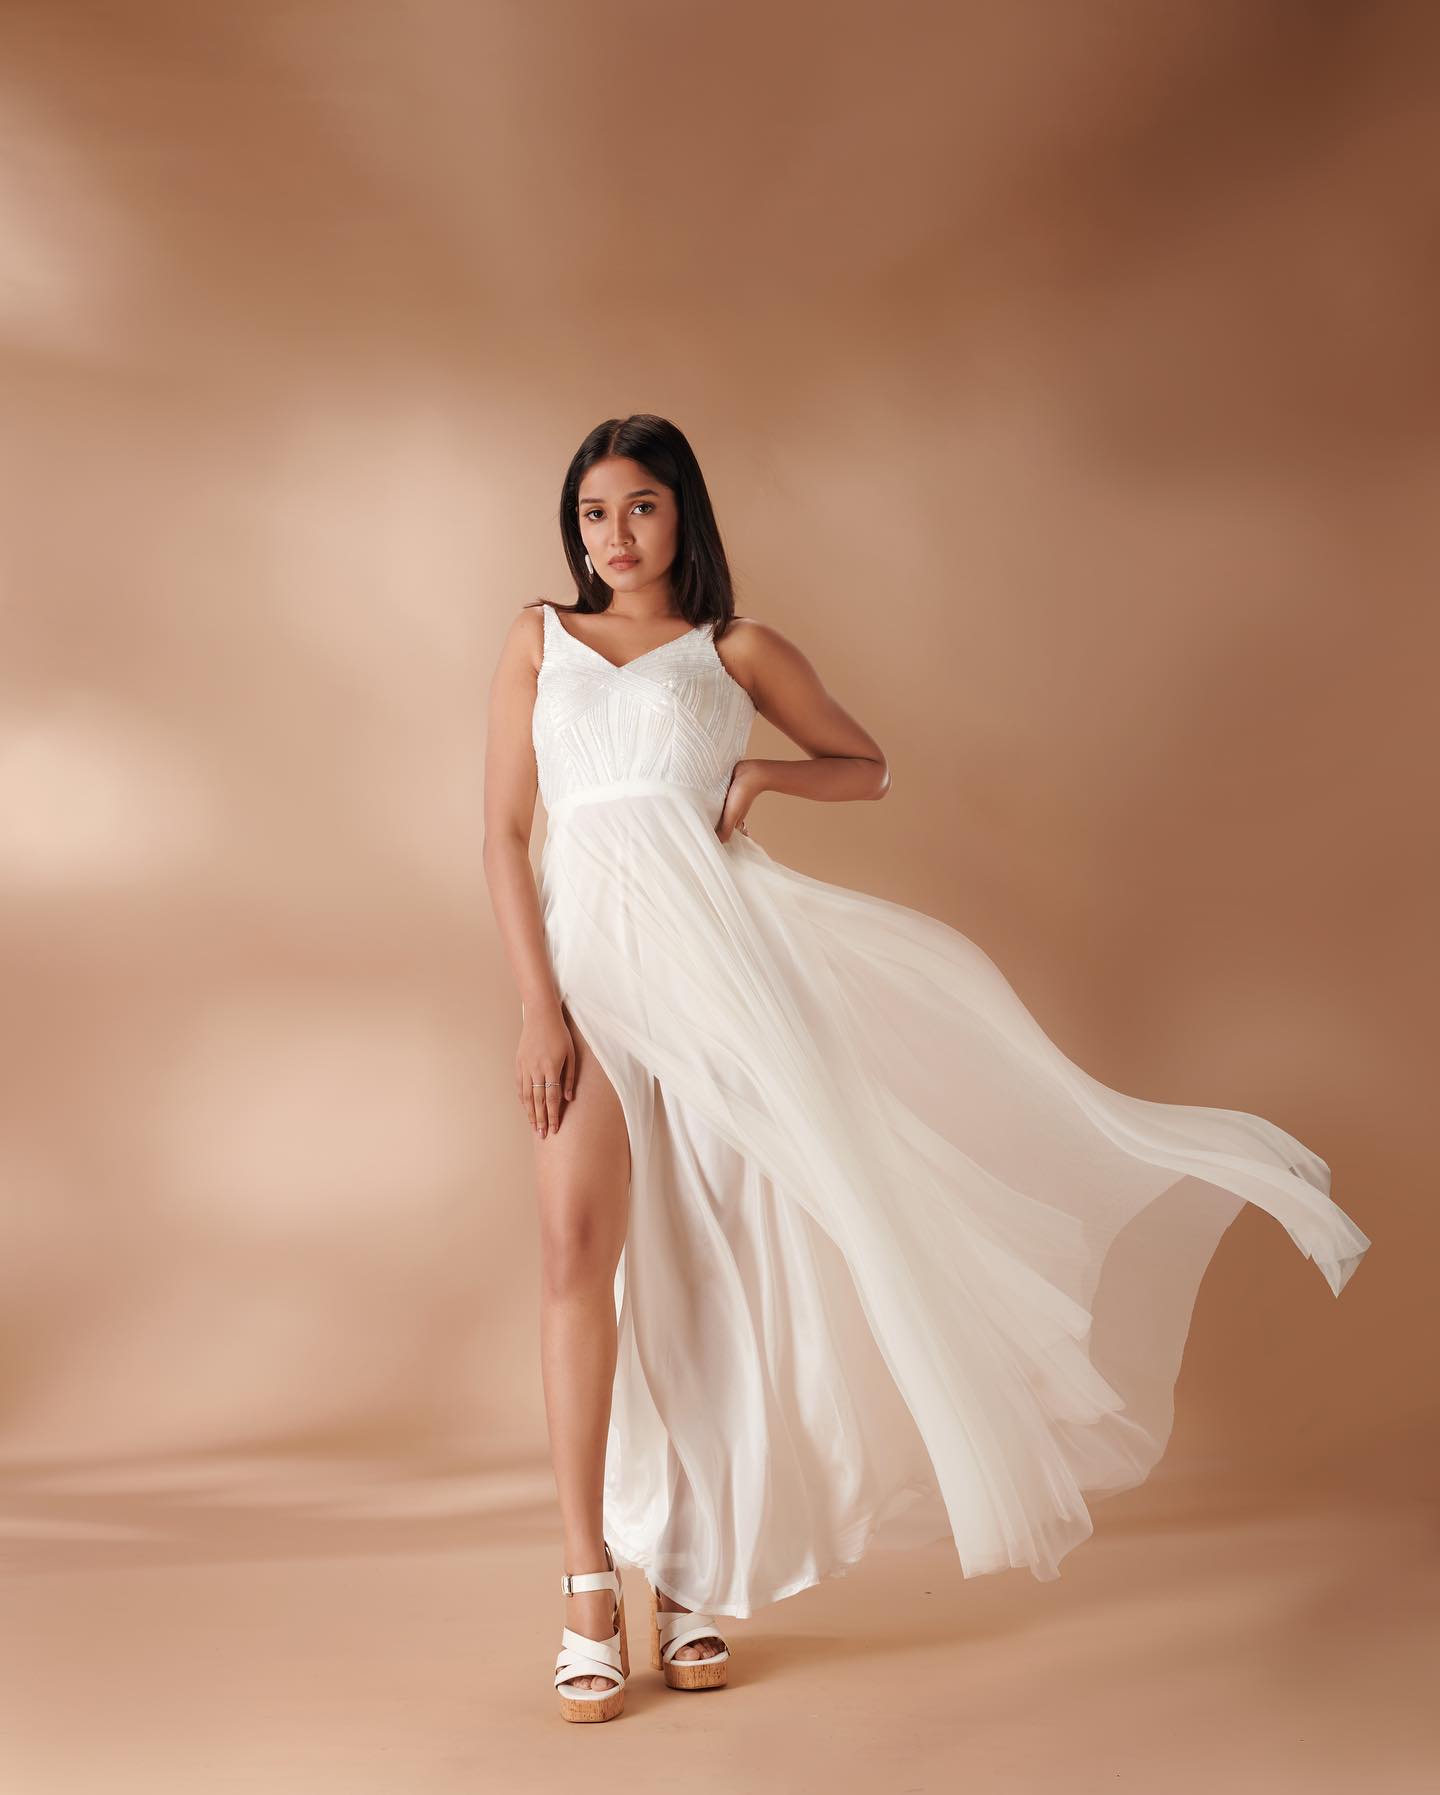 anikha-surendran-in-white-sleeveless-gown-dress-images